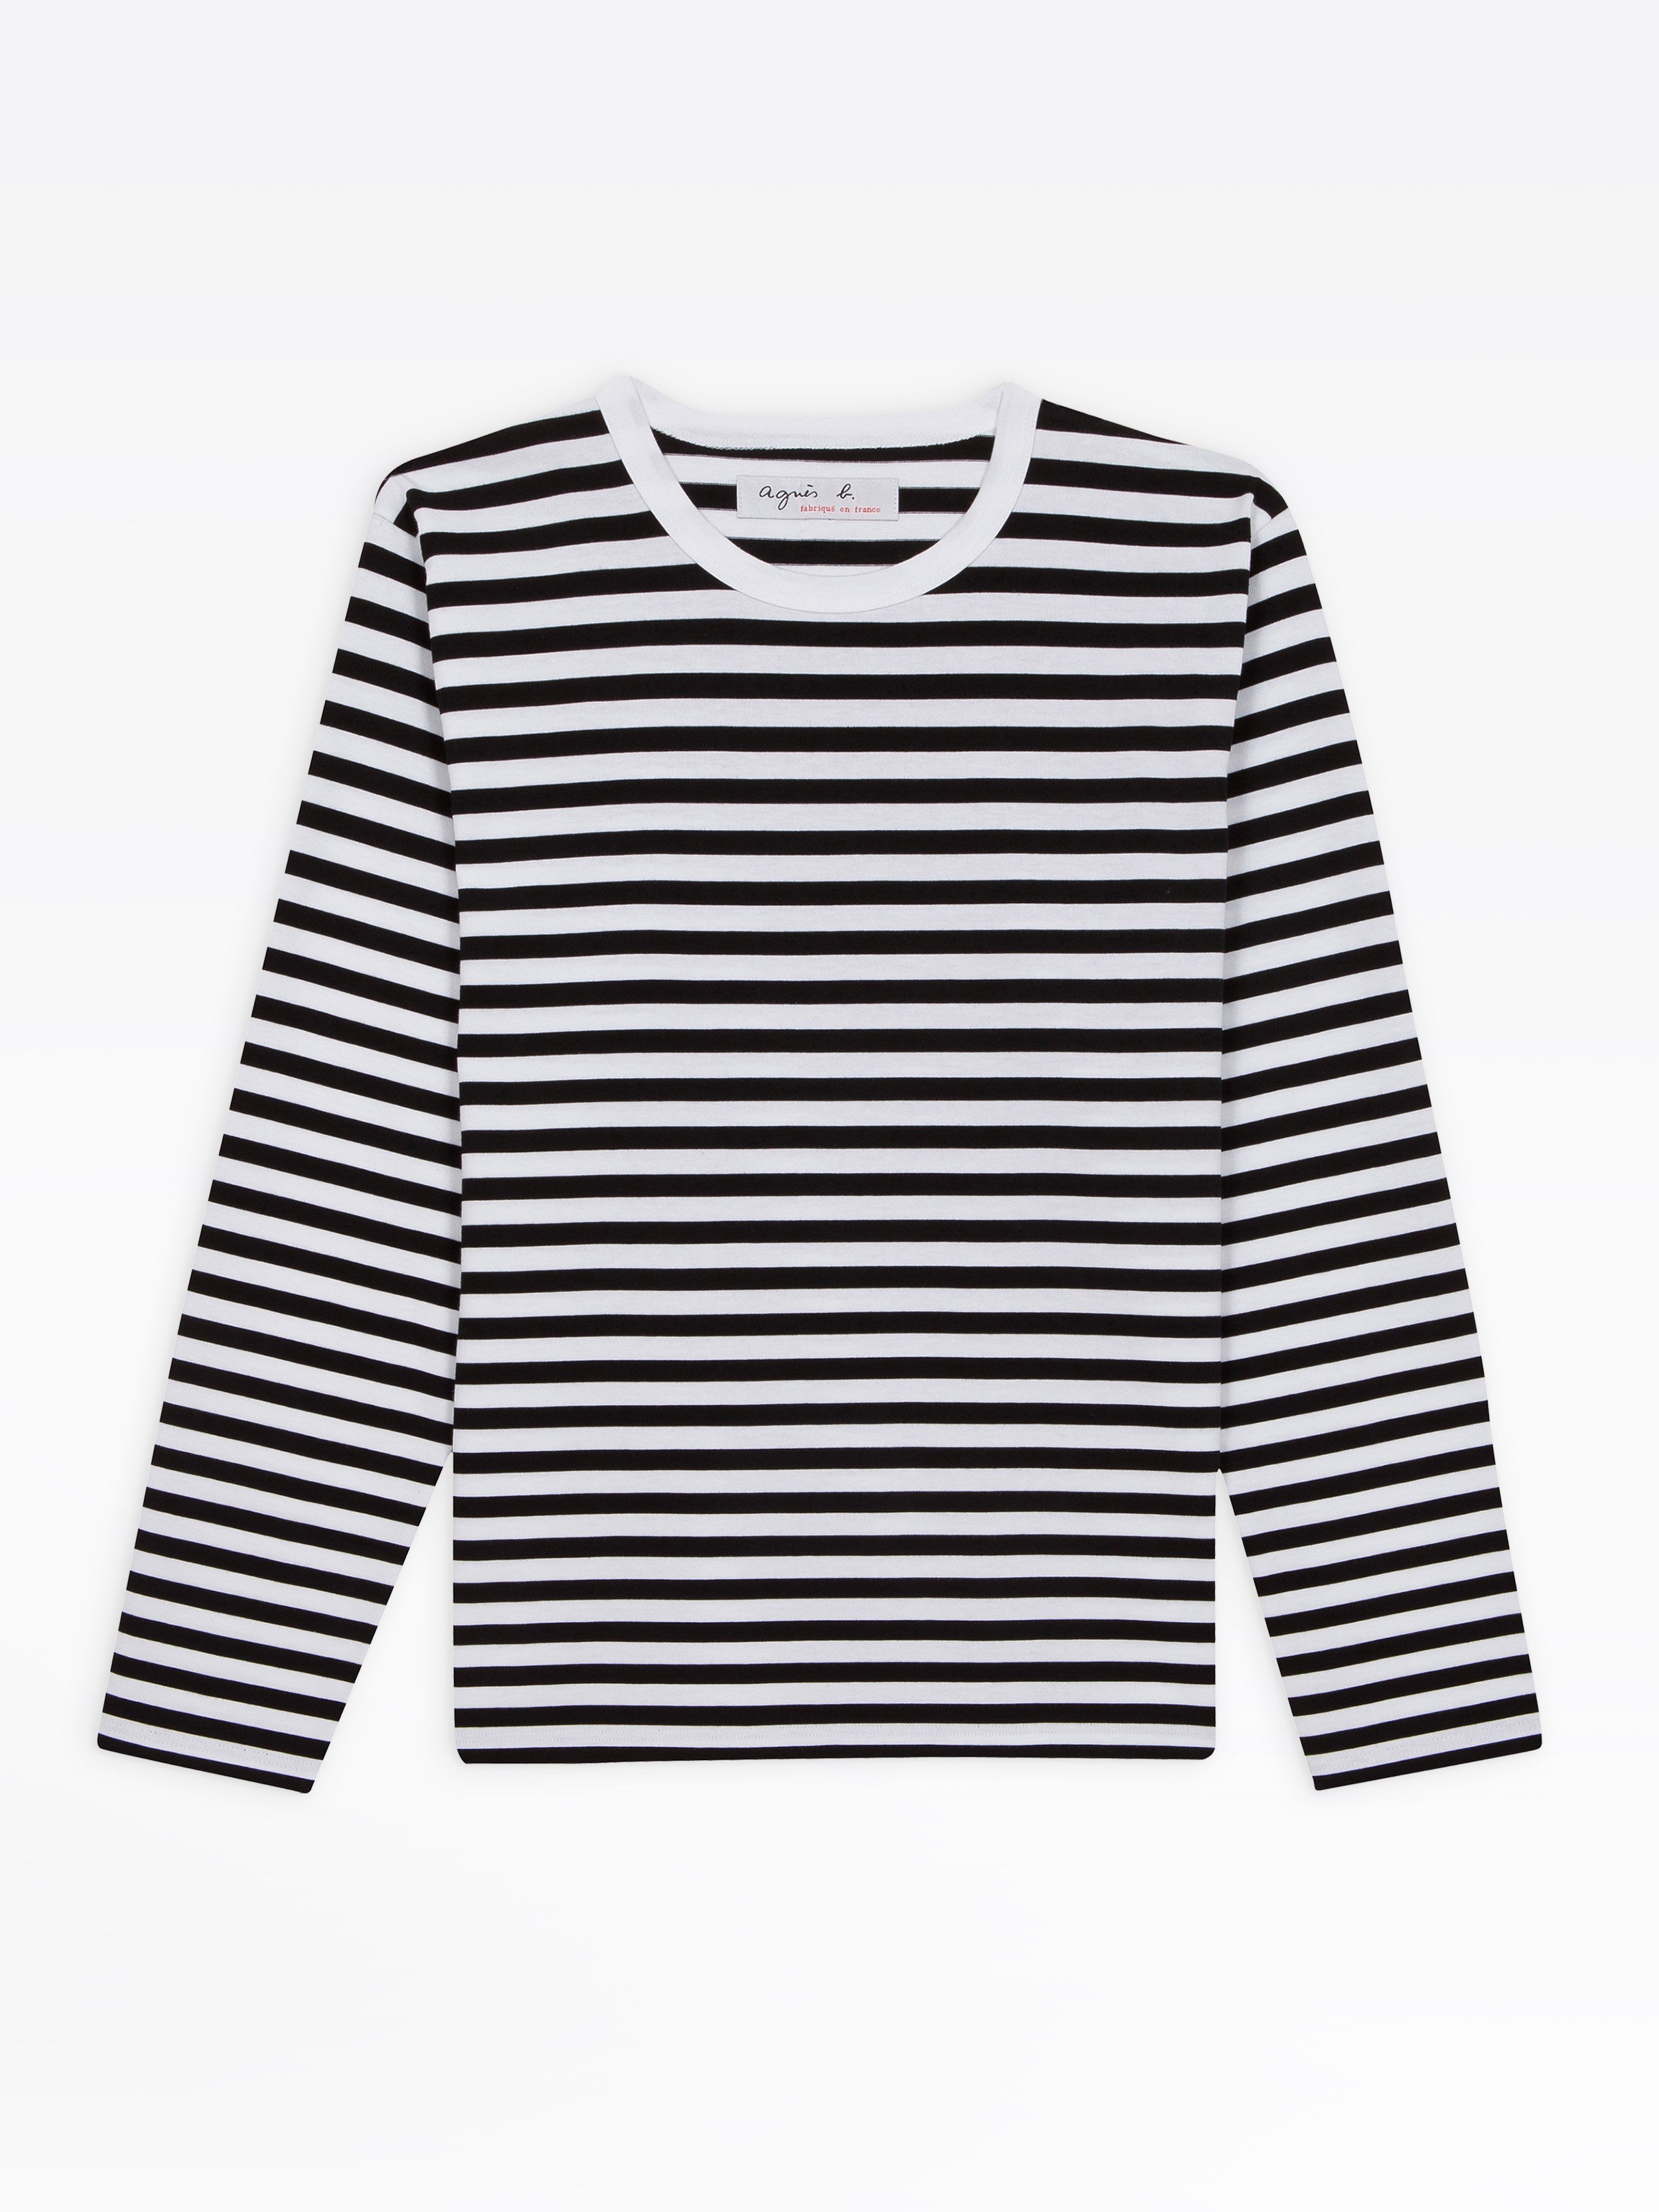 Black White Stripes T Shirt Coulos